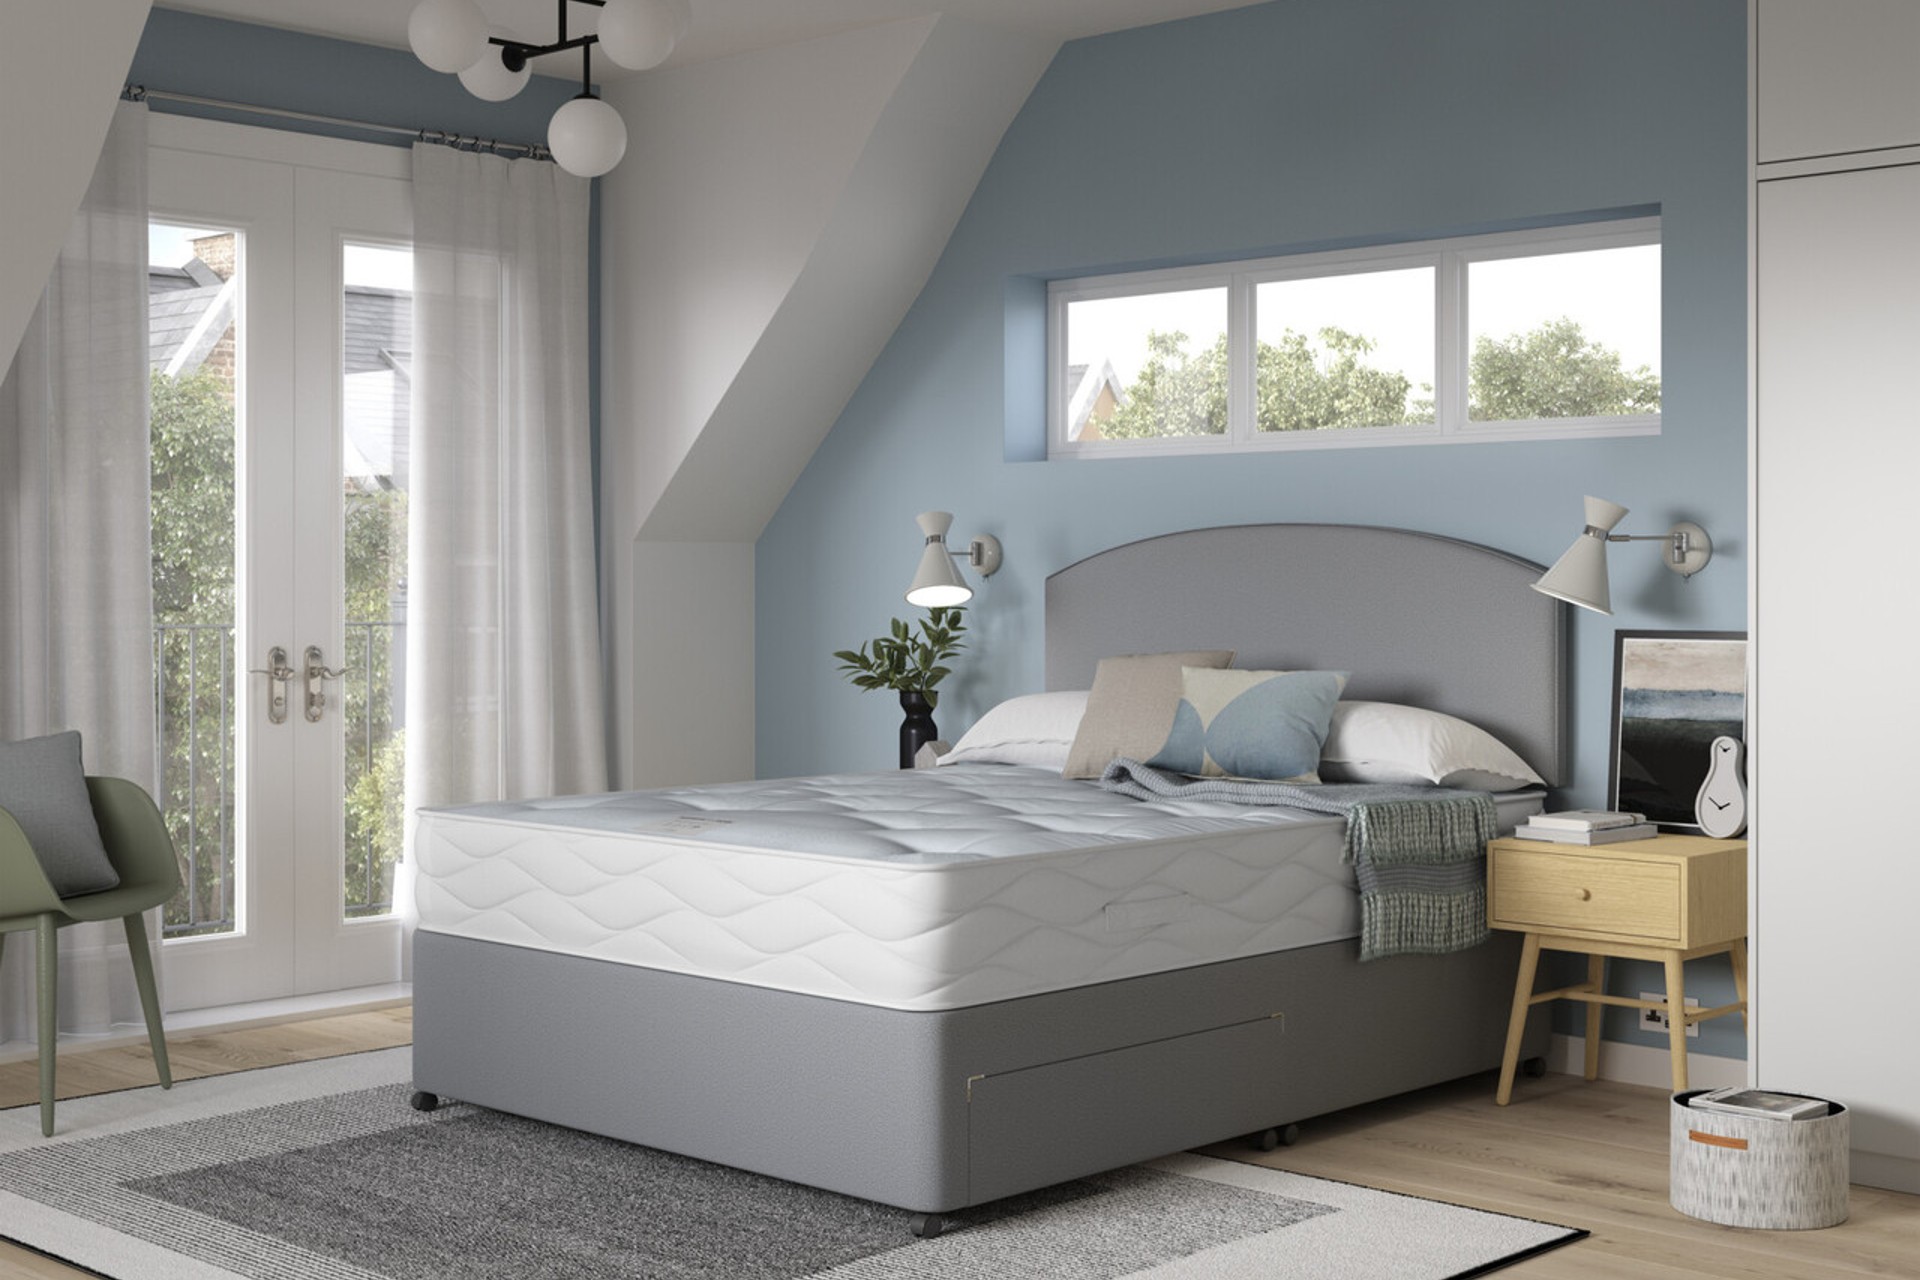 Mansfield Ortho Divan Bed and Mattress Set in cool grey